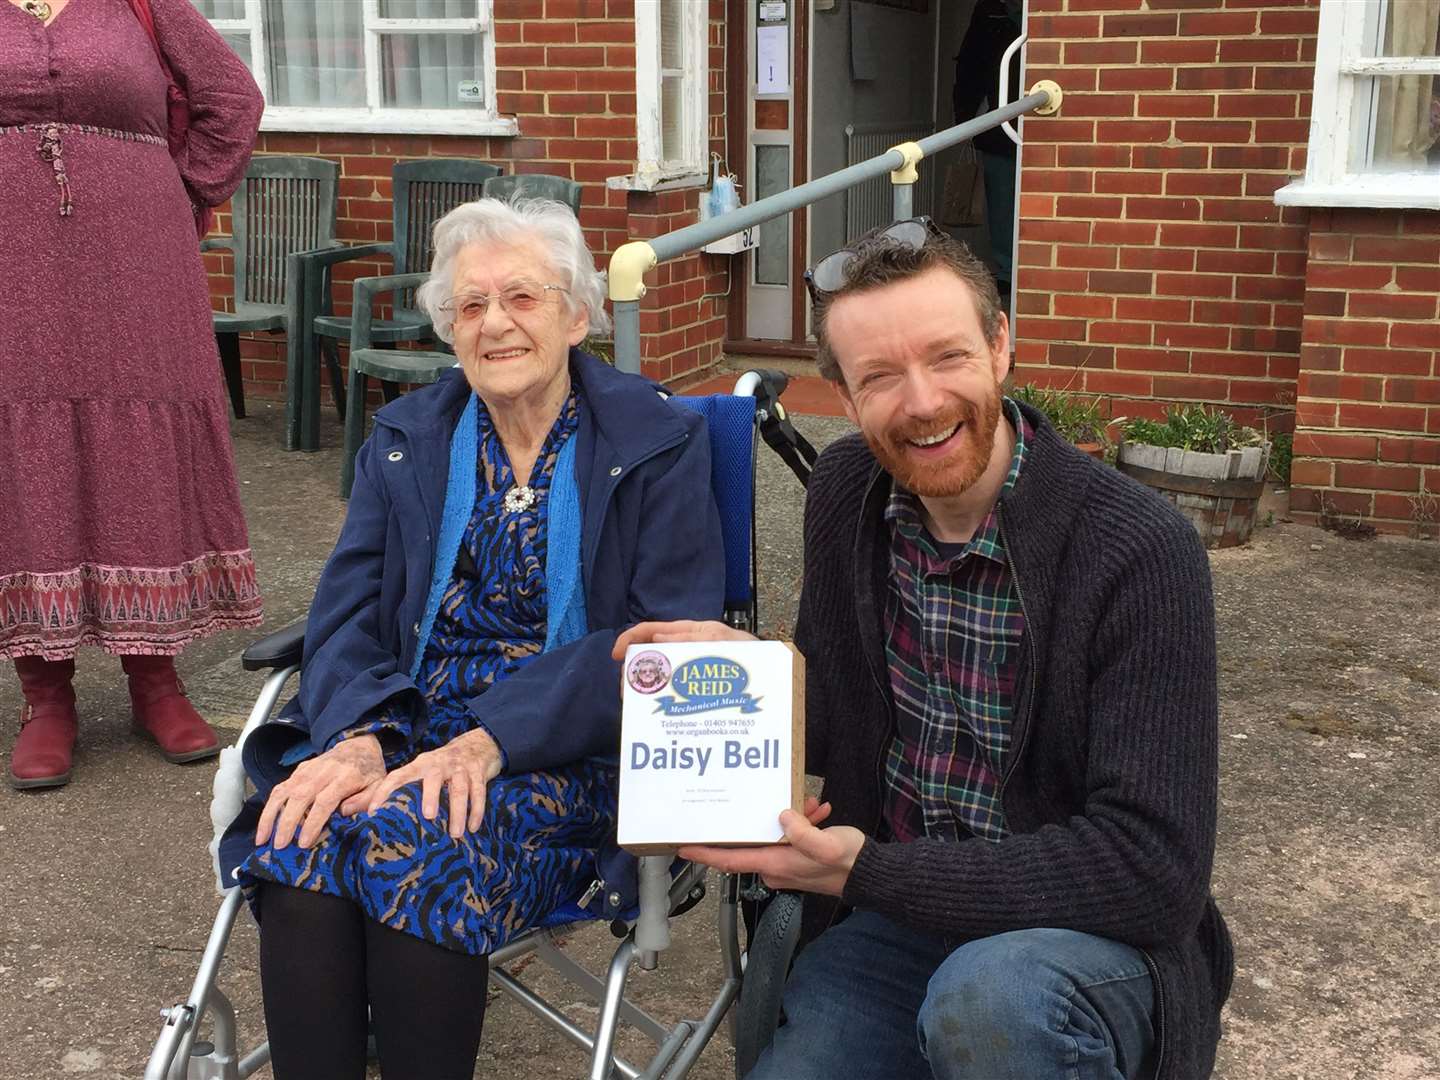 Yvonne Burgess with David Burville, who had her favourite song Daisy Bell cut into an organ book for her